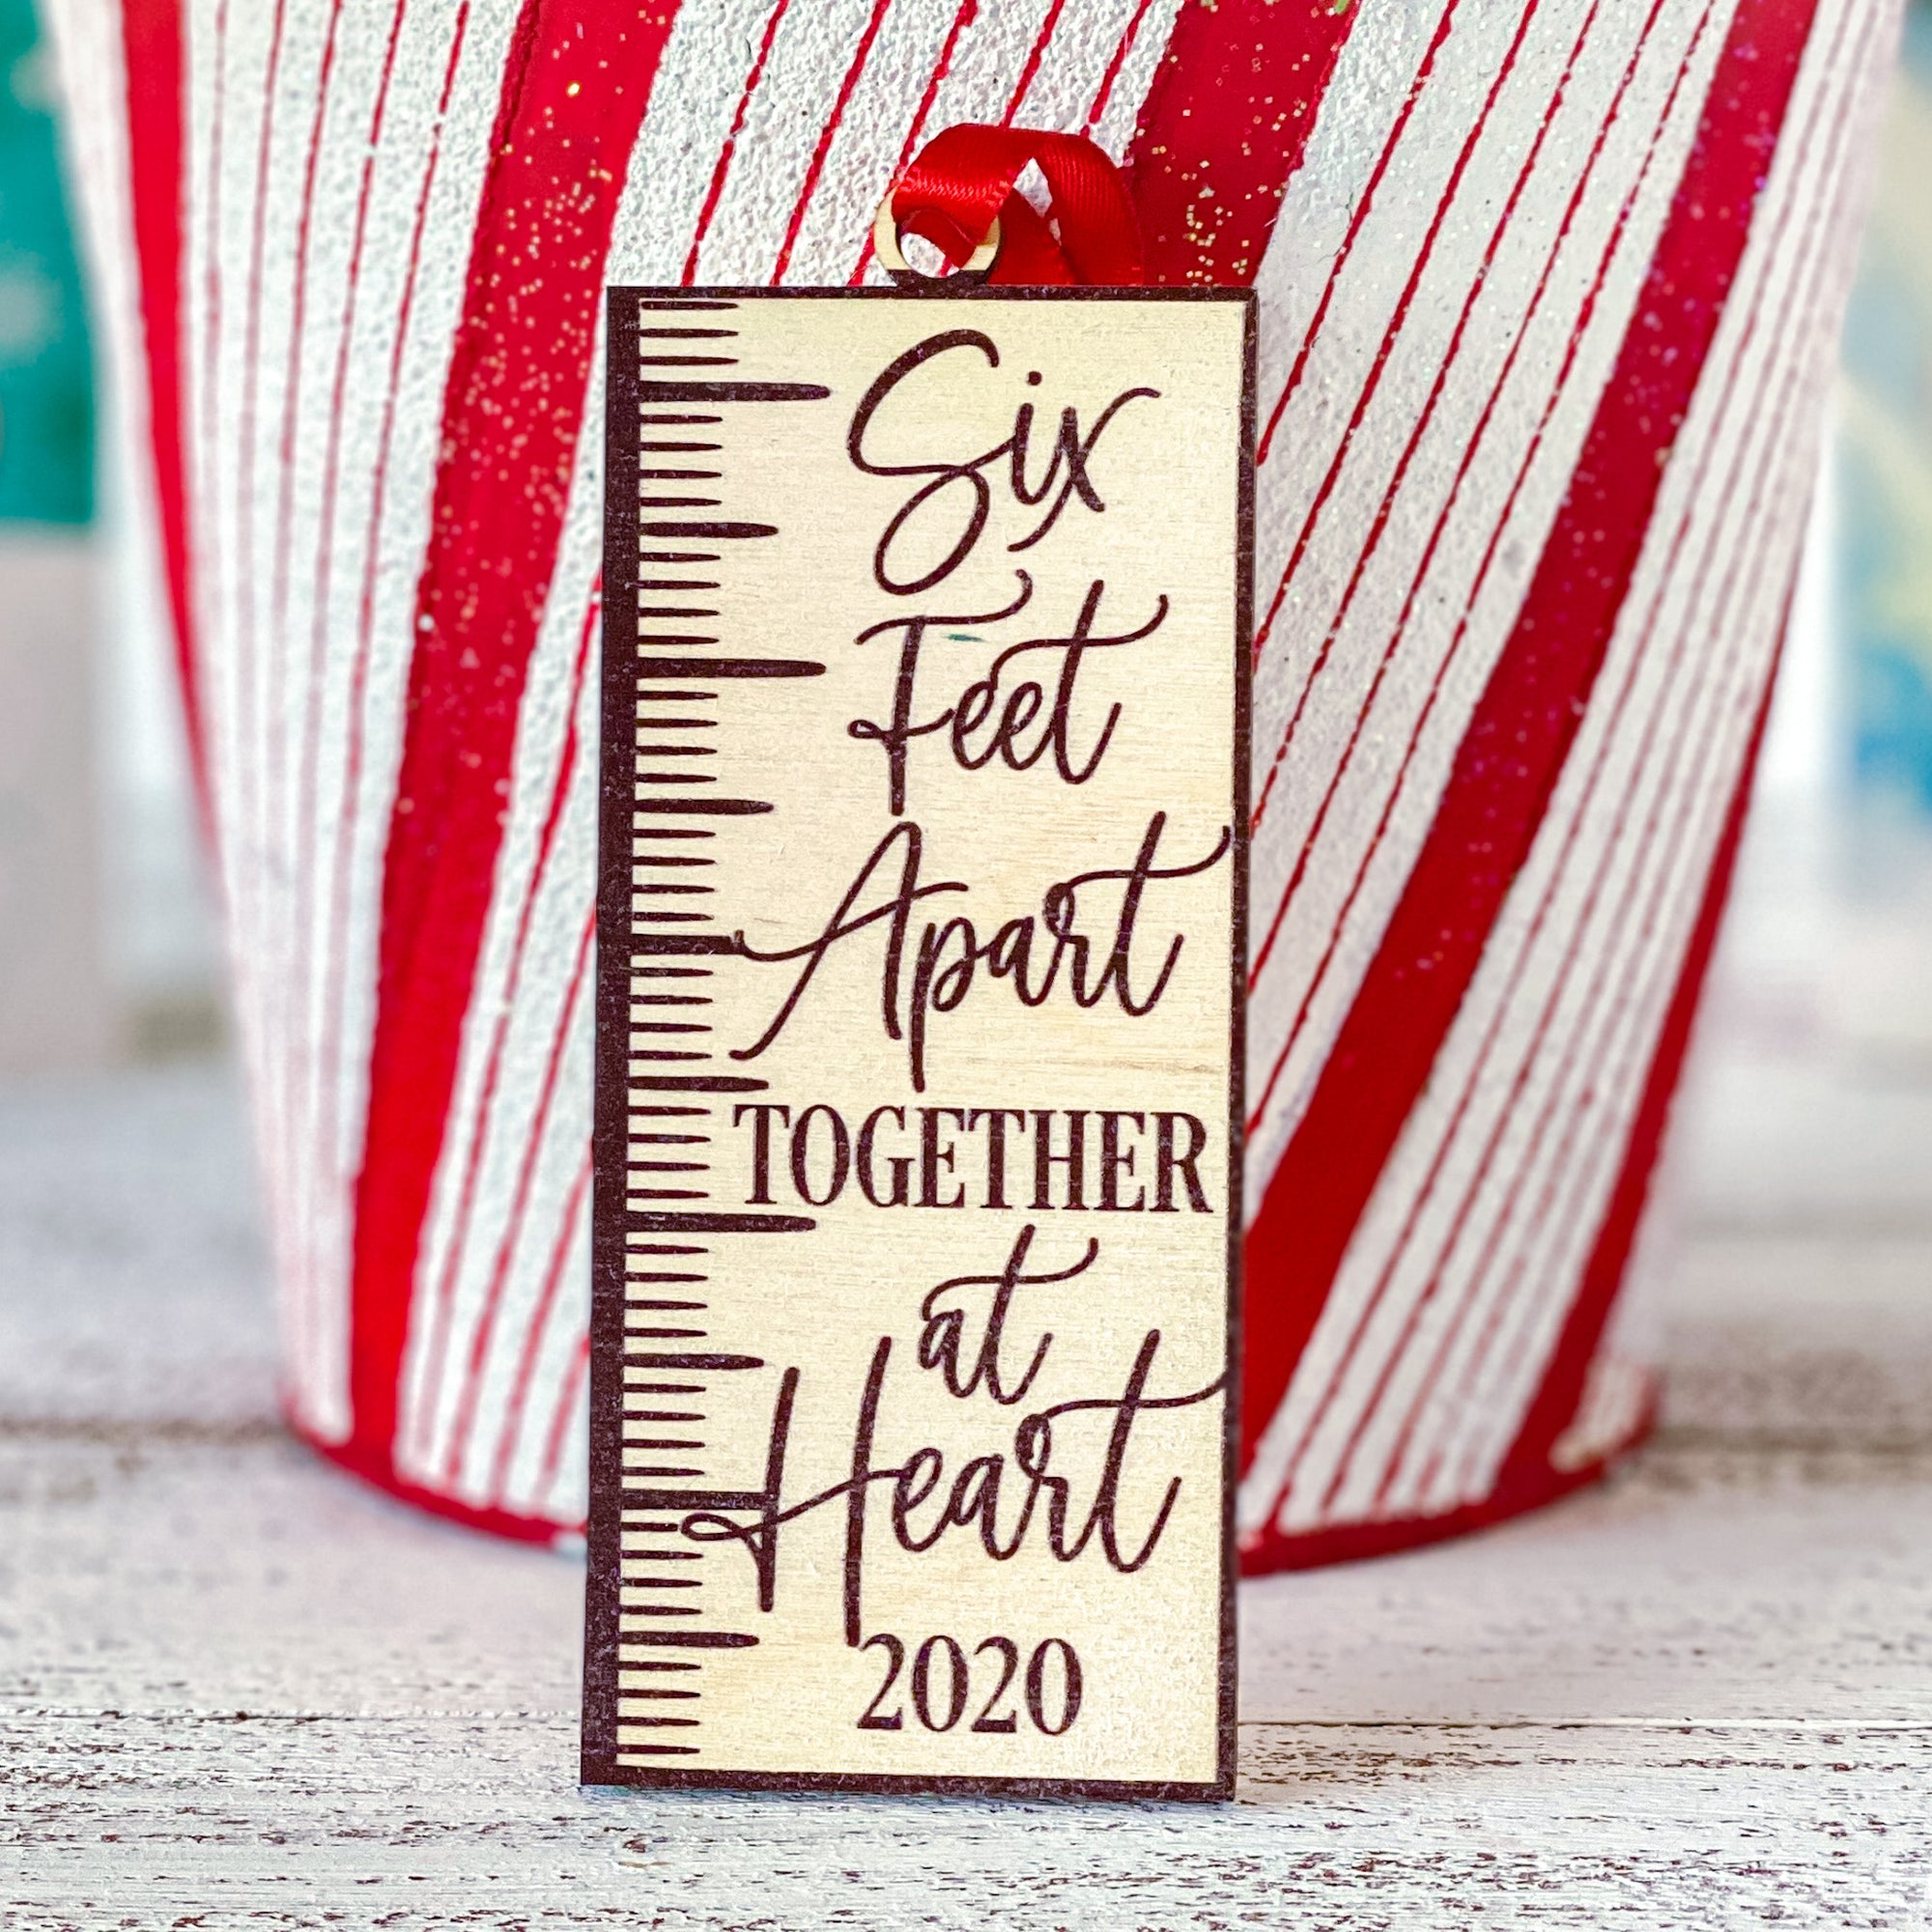 Six Feet Apart Together At Heart 2020